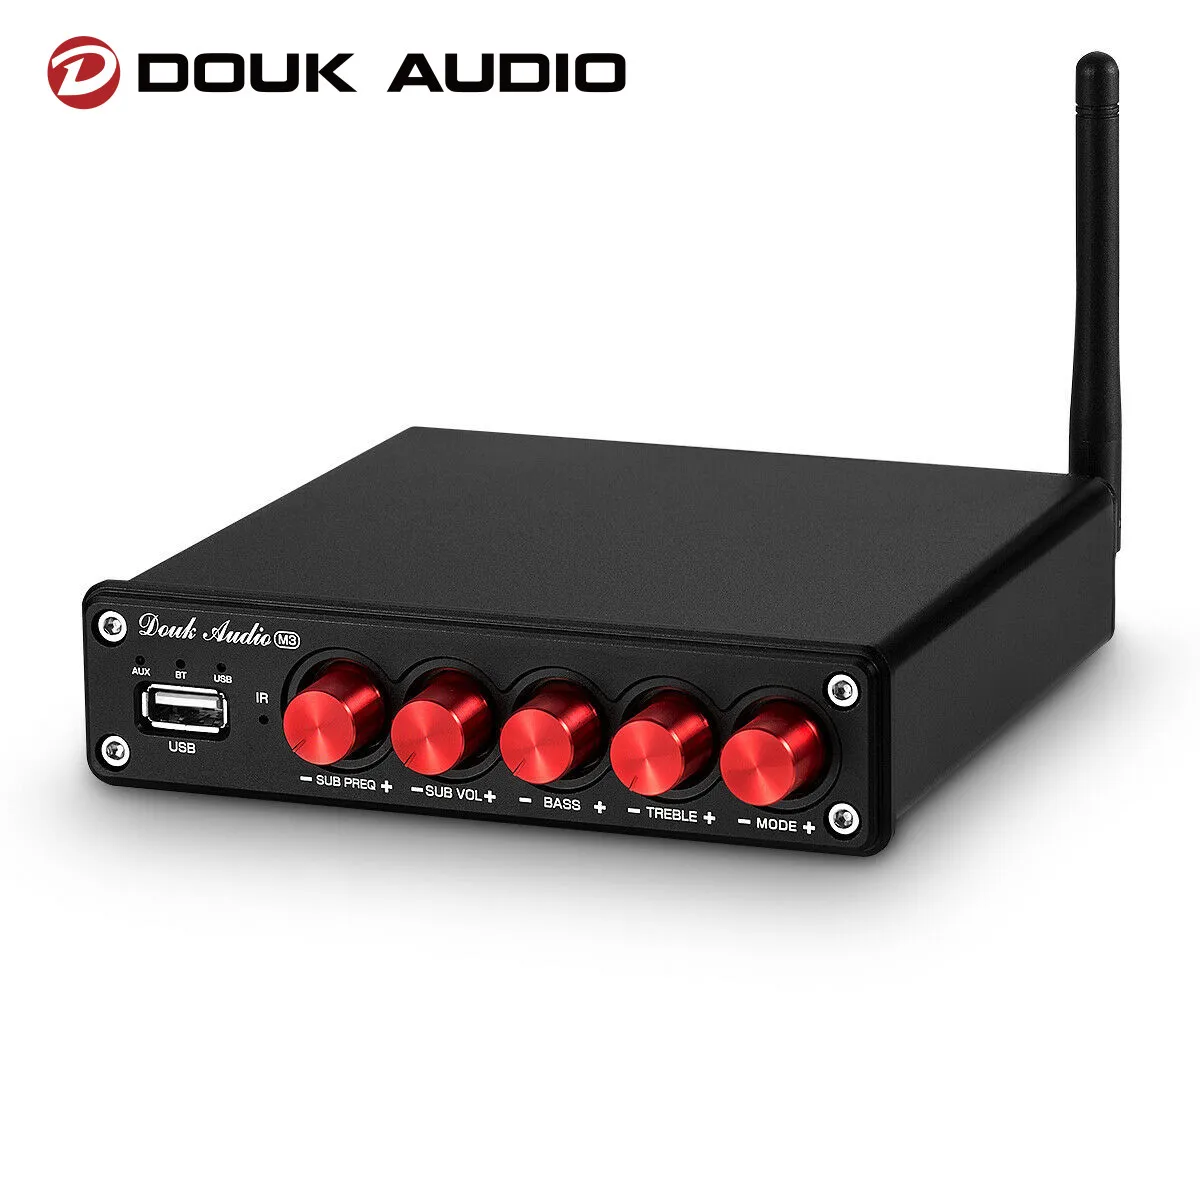 Douk Audio M3 HiFi 2.1 Channel Bluetooth 5.0 Digital Amplifier Receiver Subwoofer Amp Stereo Audio Amp USB Player w/Tone Control